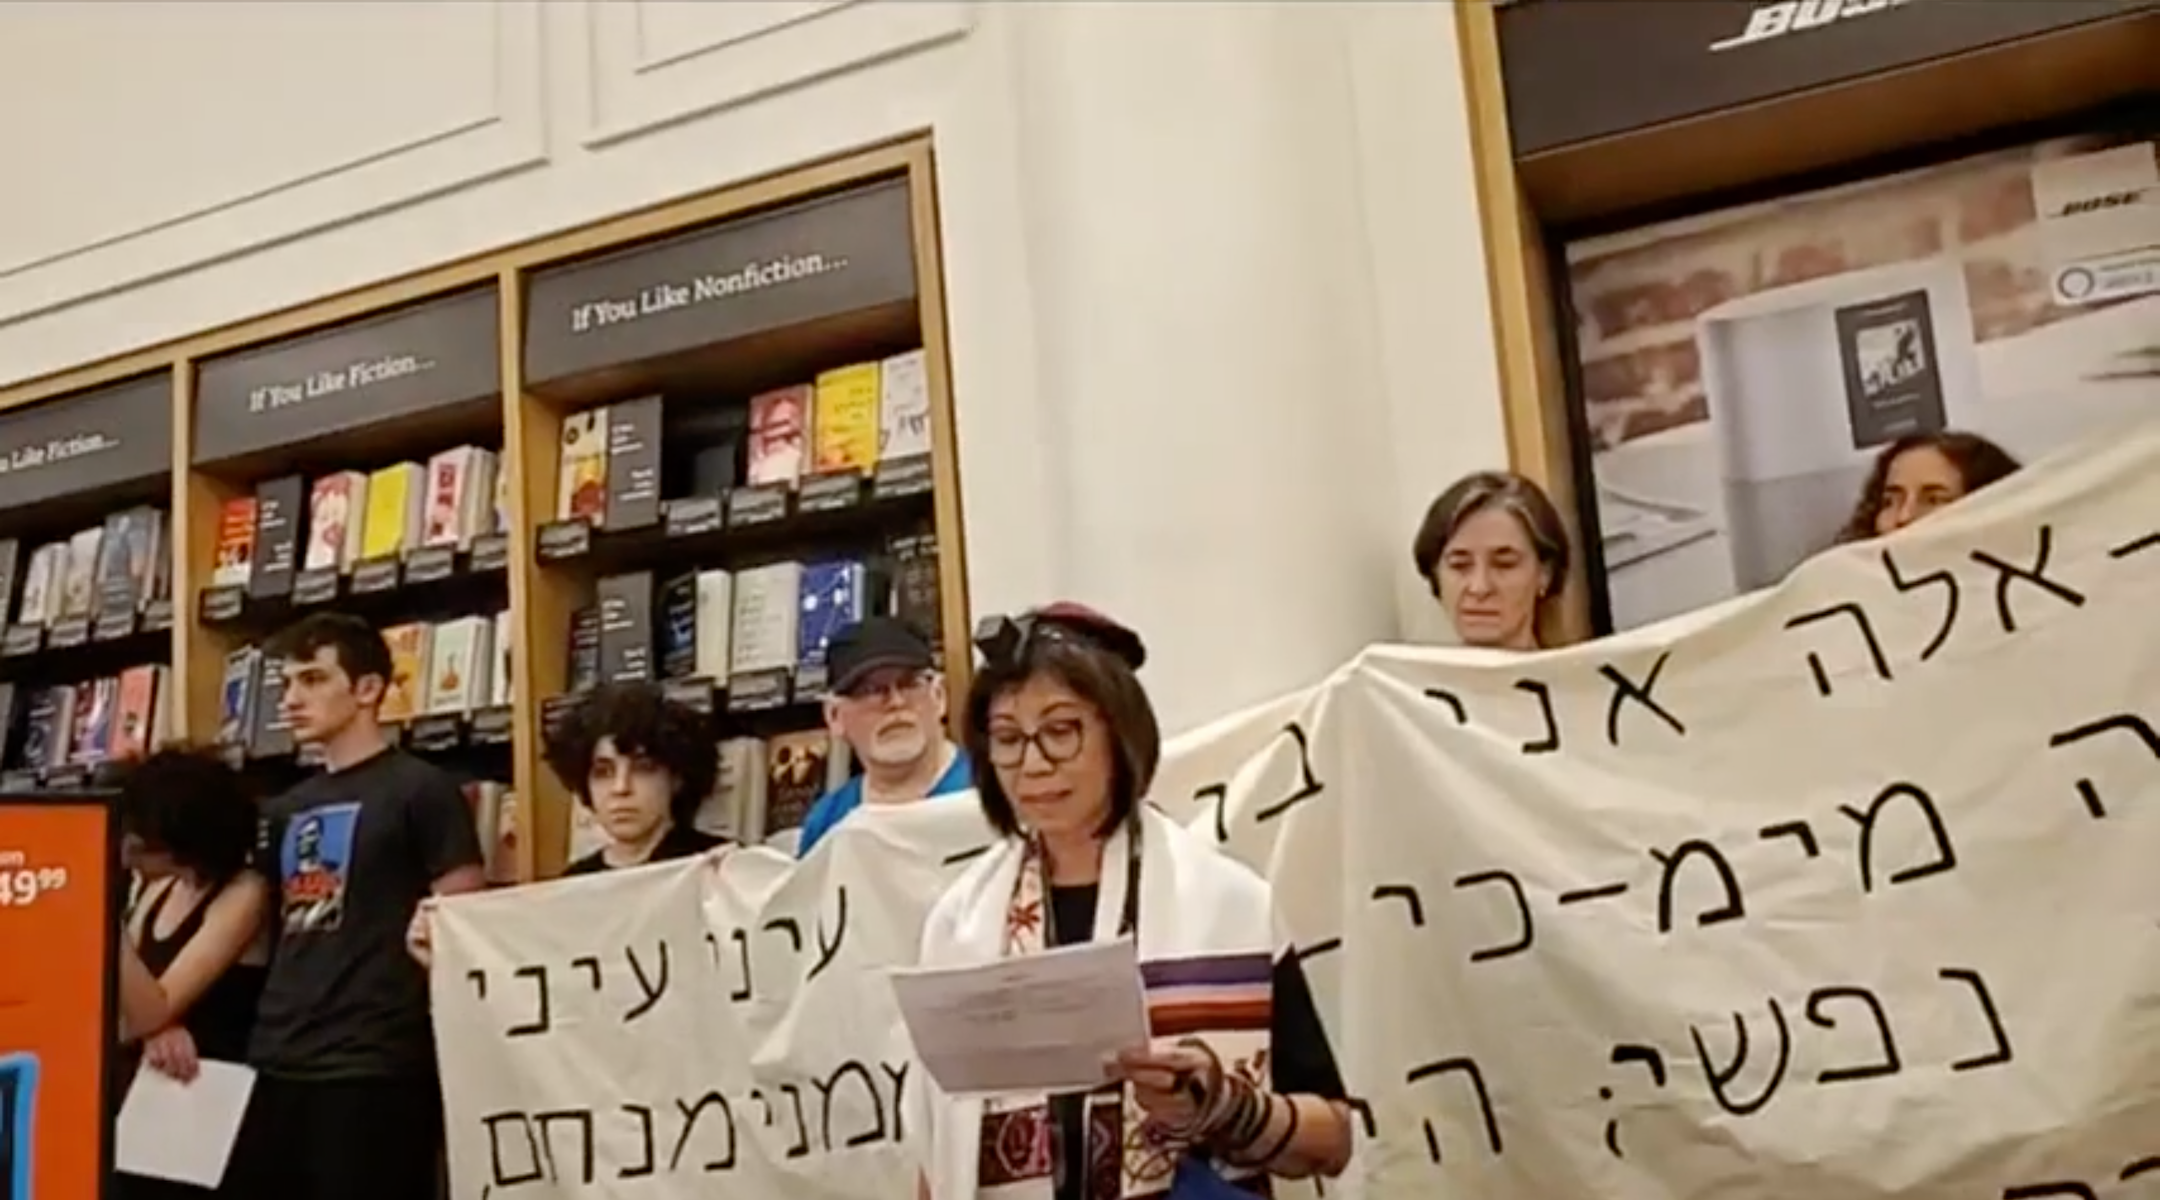 A demonstrator speaks at a Jewish protest against Amazon at one of the company's brick-and-mortar stores in New York City on Sunday, August 11. The protest was held on Tisha B'Av, a traditional Jewish day of mourning. Behind the speaker is a banner with a Hebrew quotation from the Book of Lamentations. (Screenshot from Facebook)